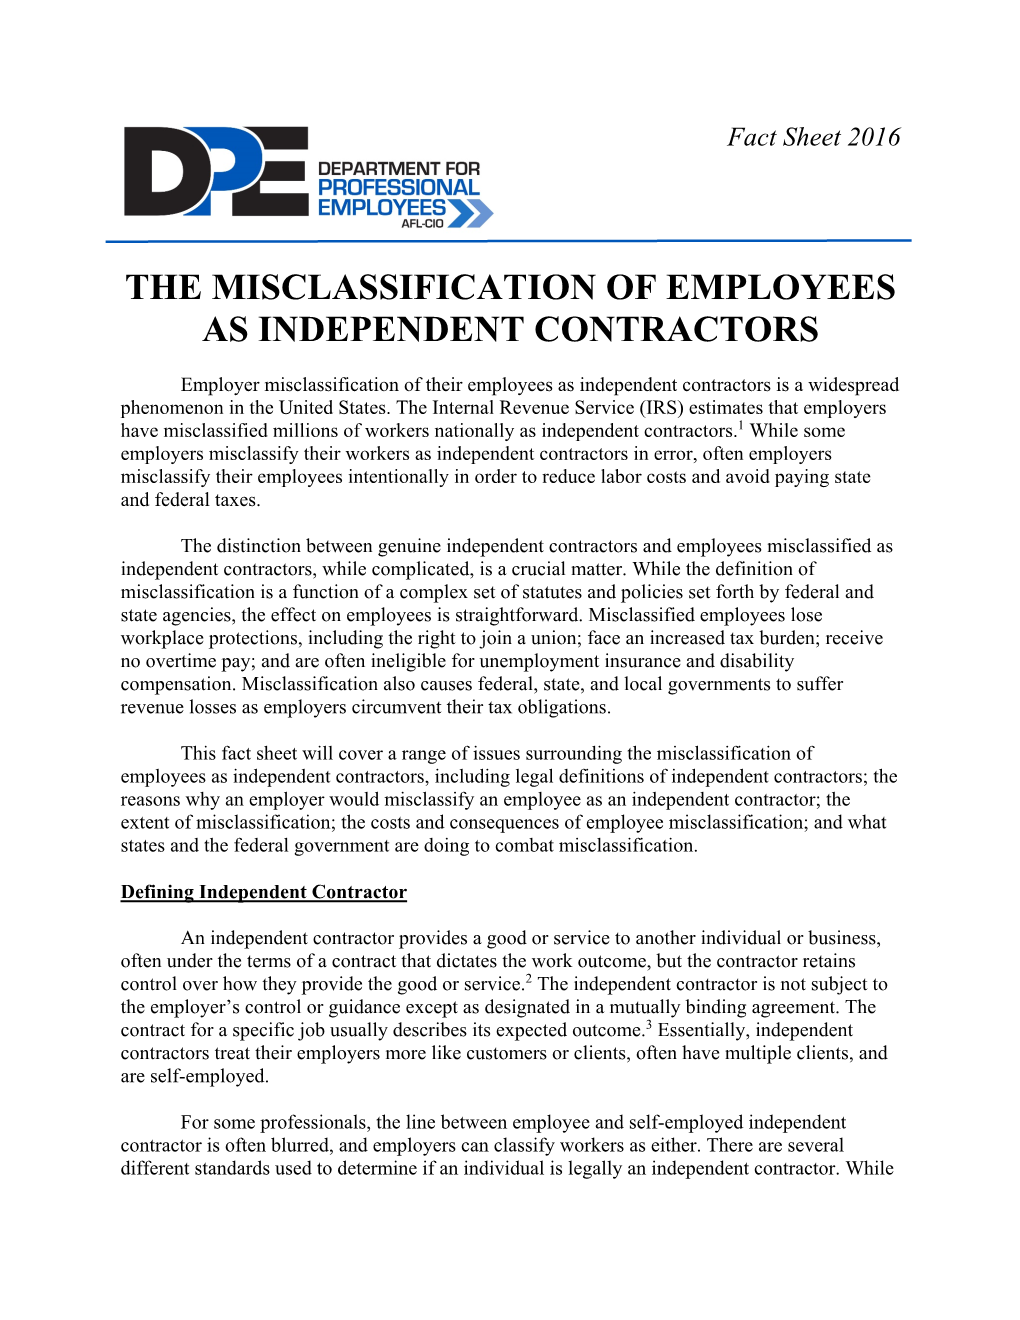 The Misclassification of Employees As Independent Contractors